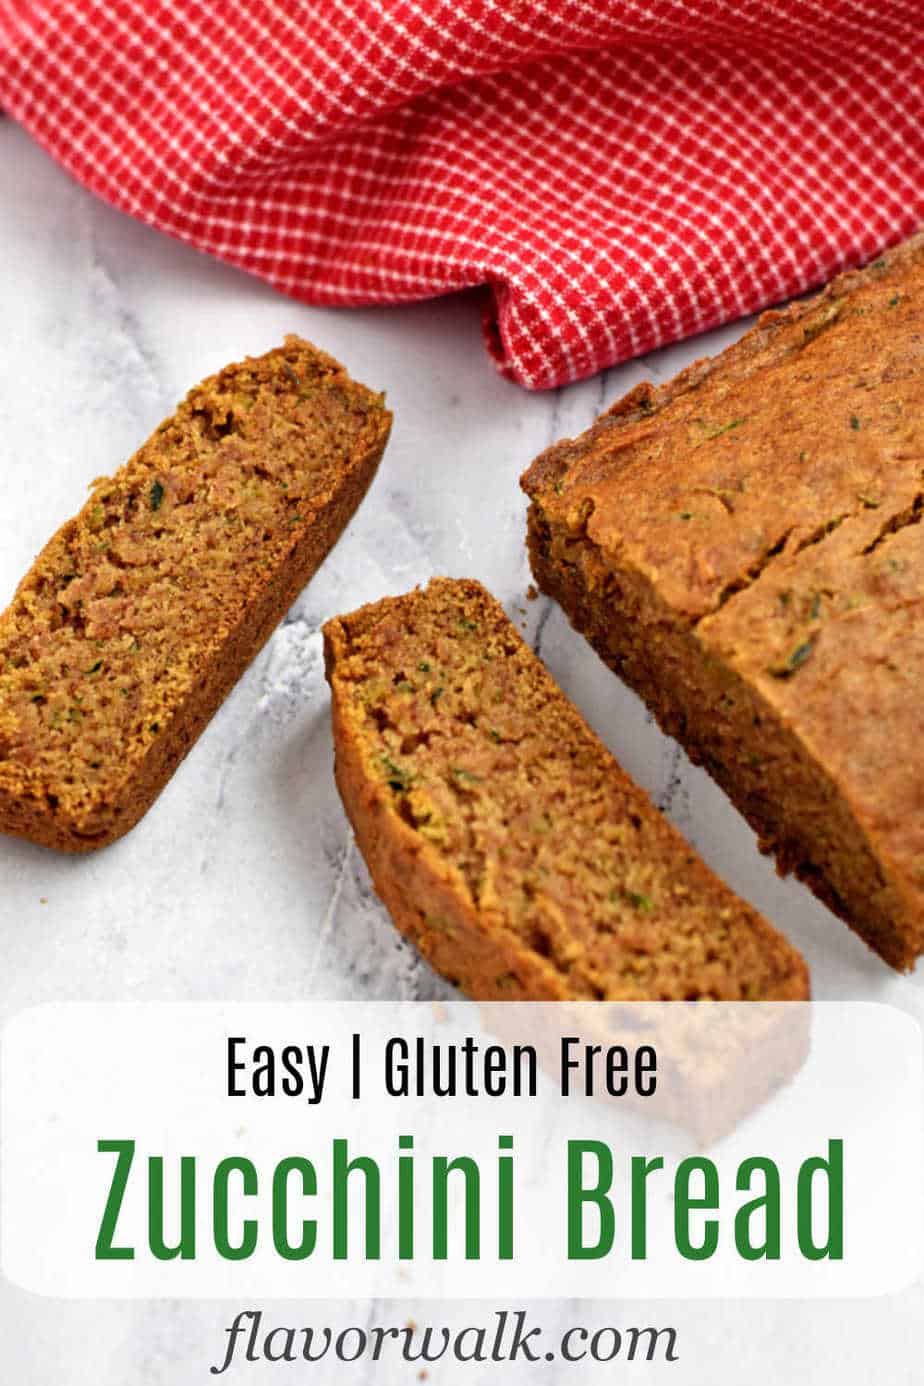 Two slices of gluten free zucchini bread on the kitchen counter, remaining loaf and a red and white checked kitchen towel in the background, and black and green text overlay at the bottom.